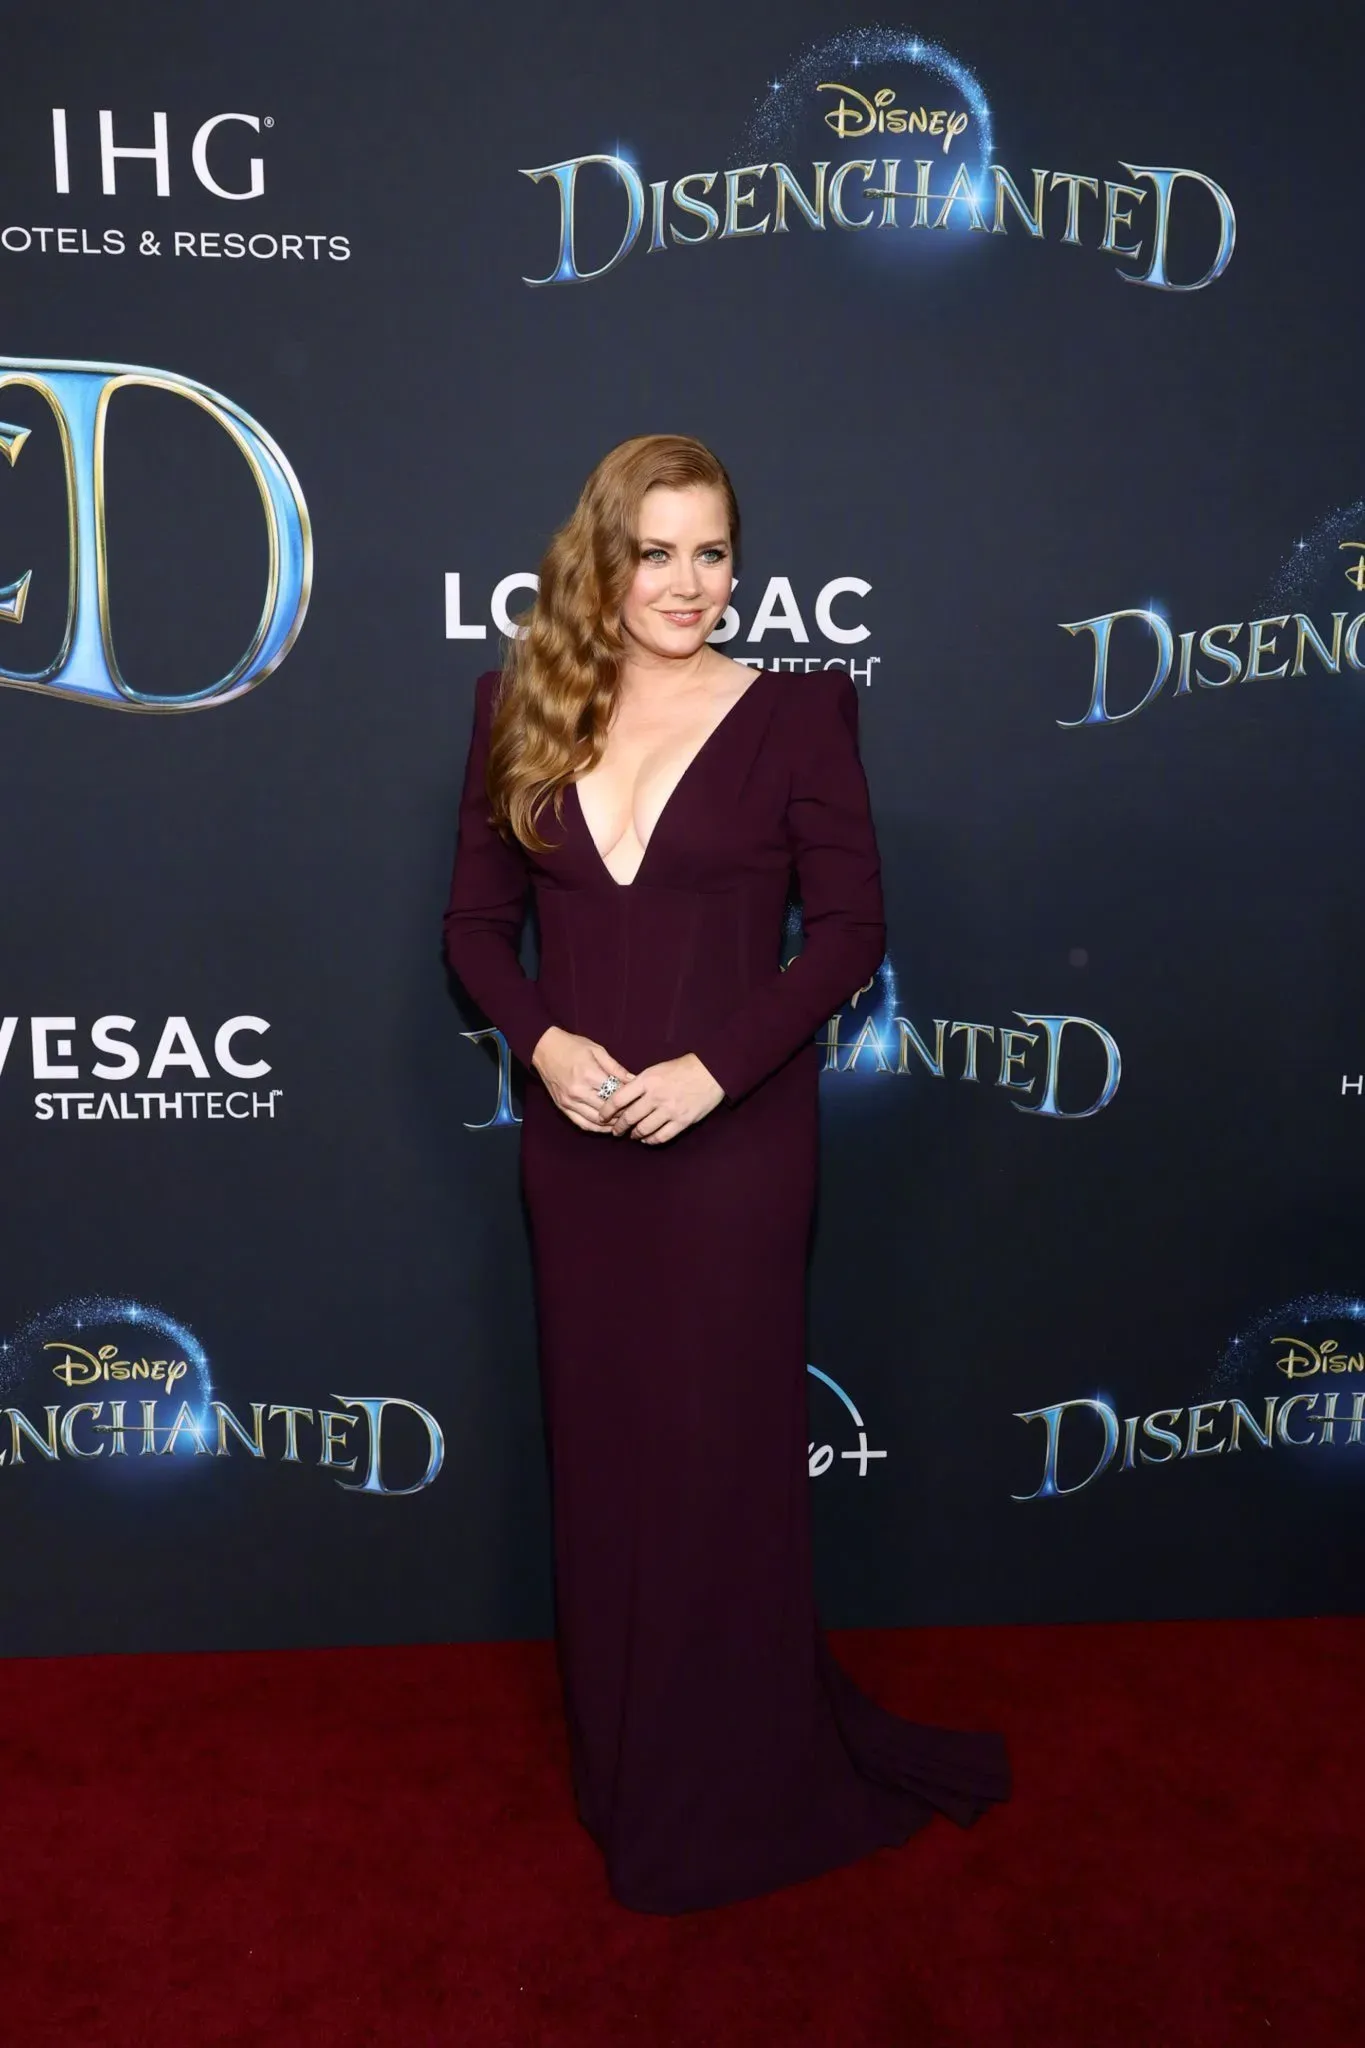 'Disenchanted' crew attend the premiere in Los Angeles ​​​ | FMV6